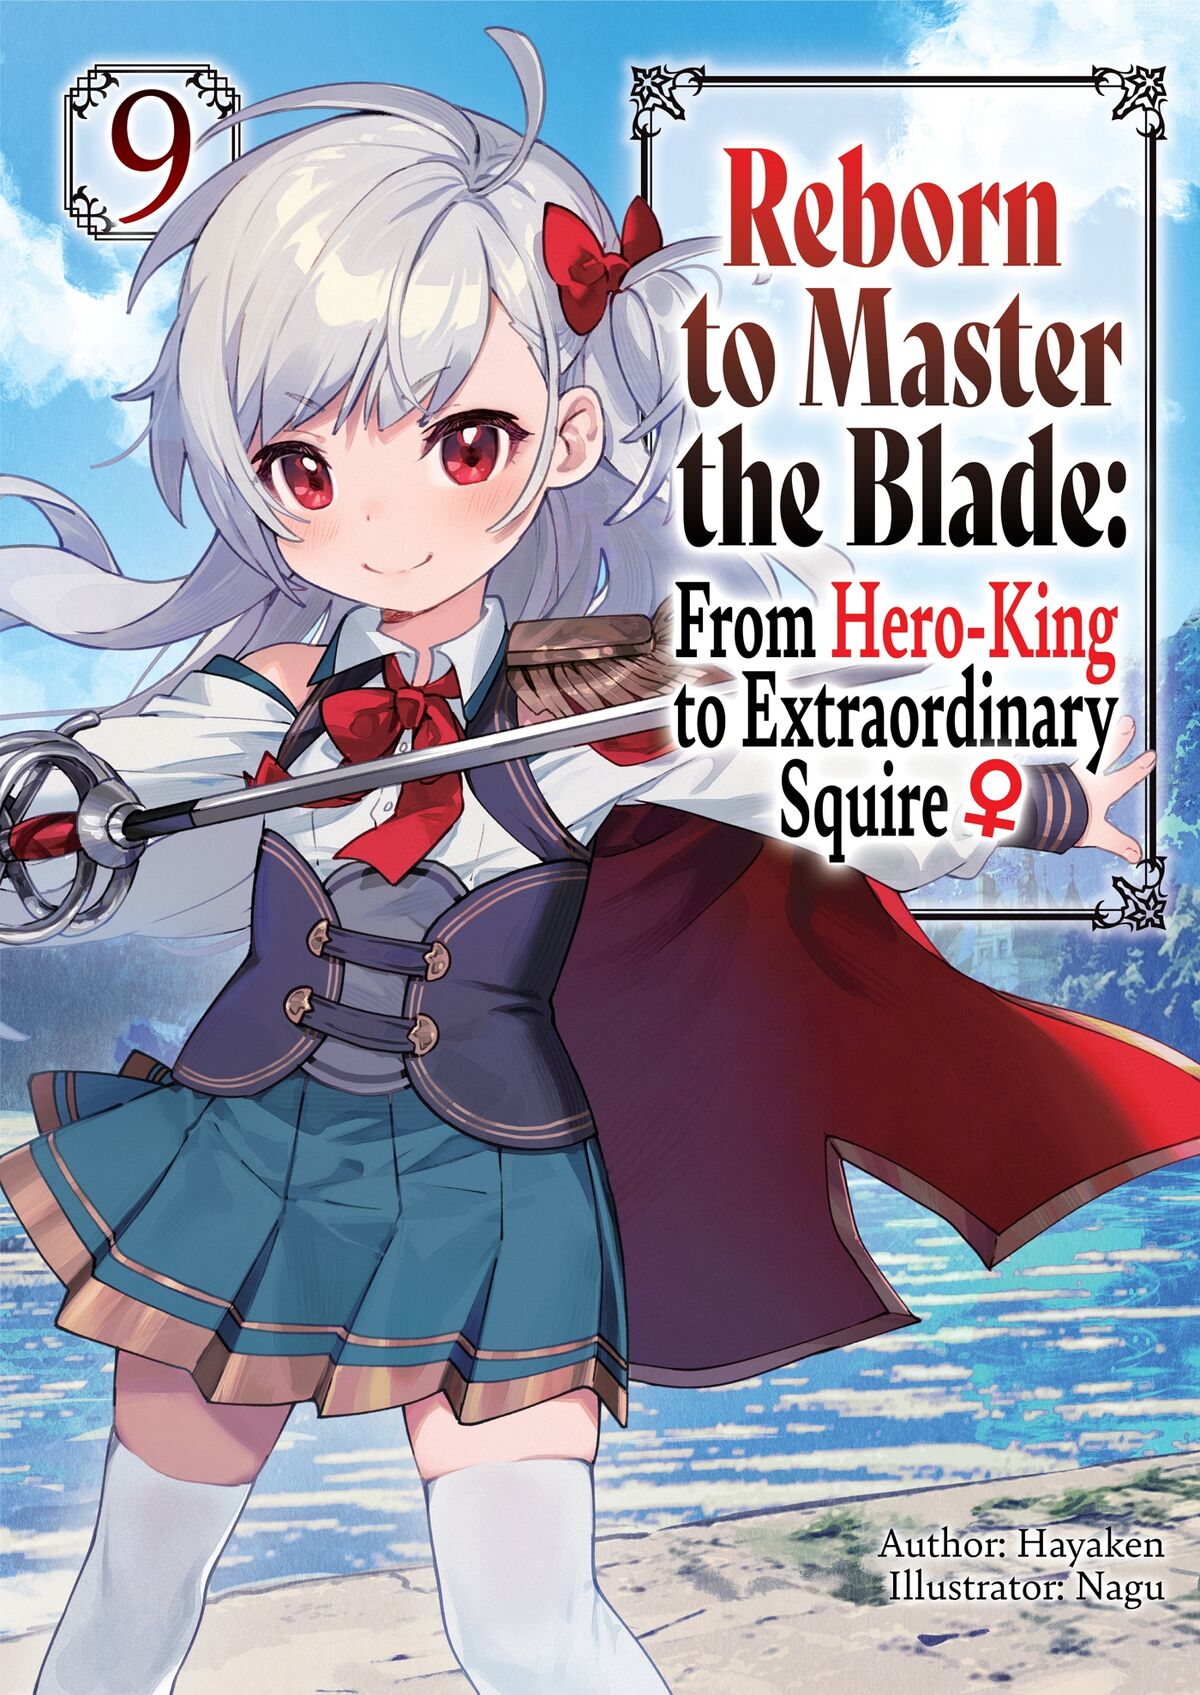 Theodore, Reborn to Master the Blade: From Hero-King to Squire ♀ Wiki